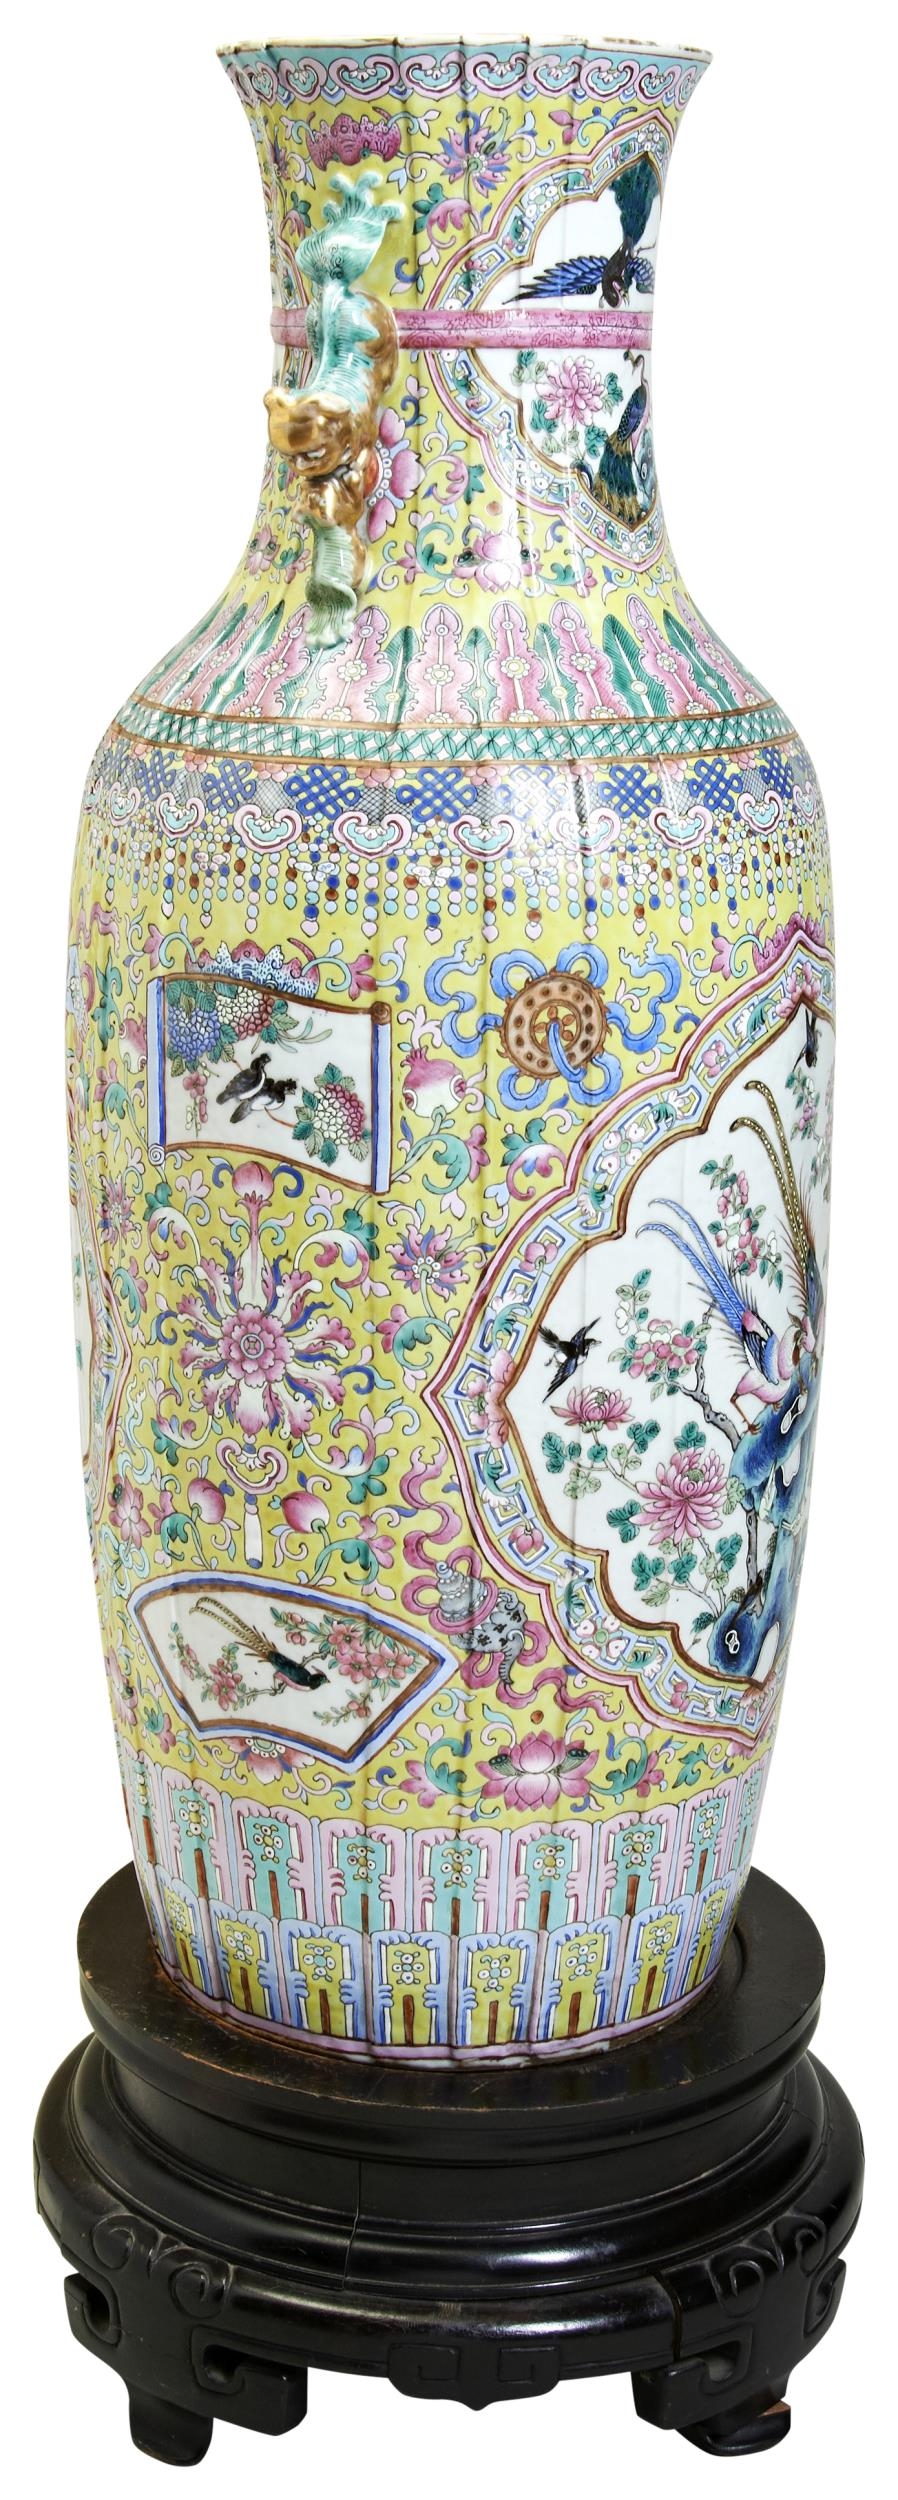 A LARGE FAMILLE ROSE YELLOW-GROUND POUCH-SHAPED FLOOR VASE QING DYNASTY, 19TH CENTURY the sides - Image 2 of 4